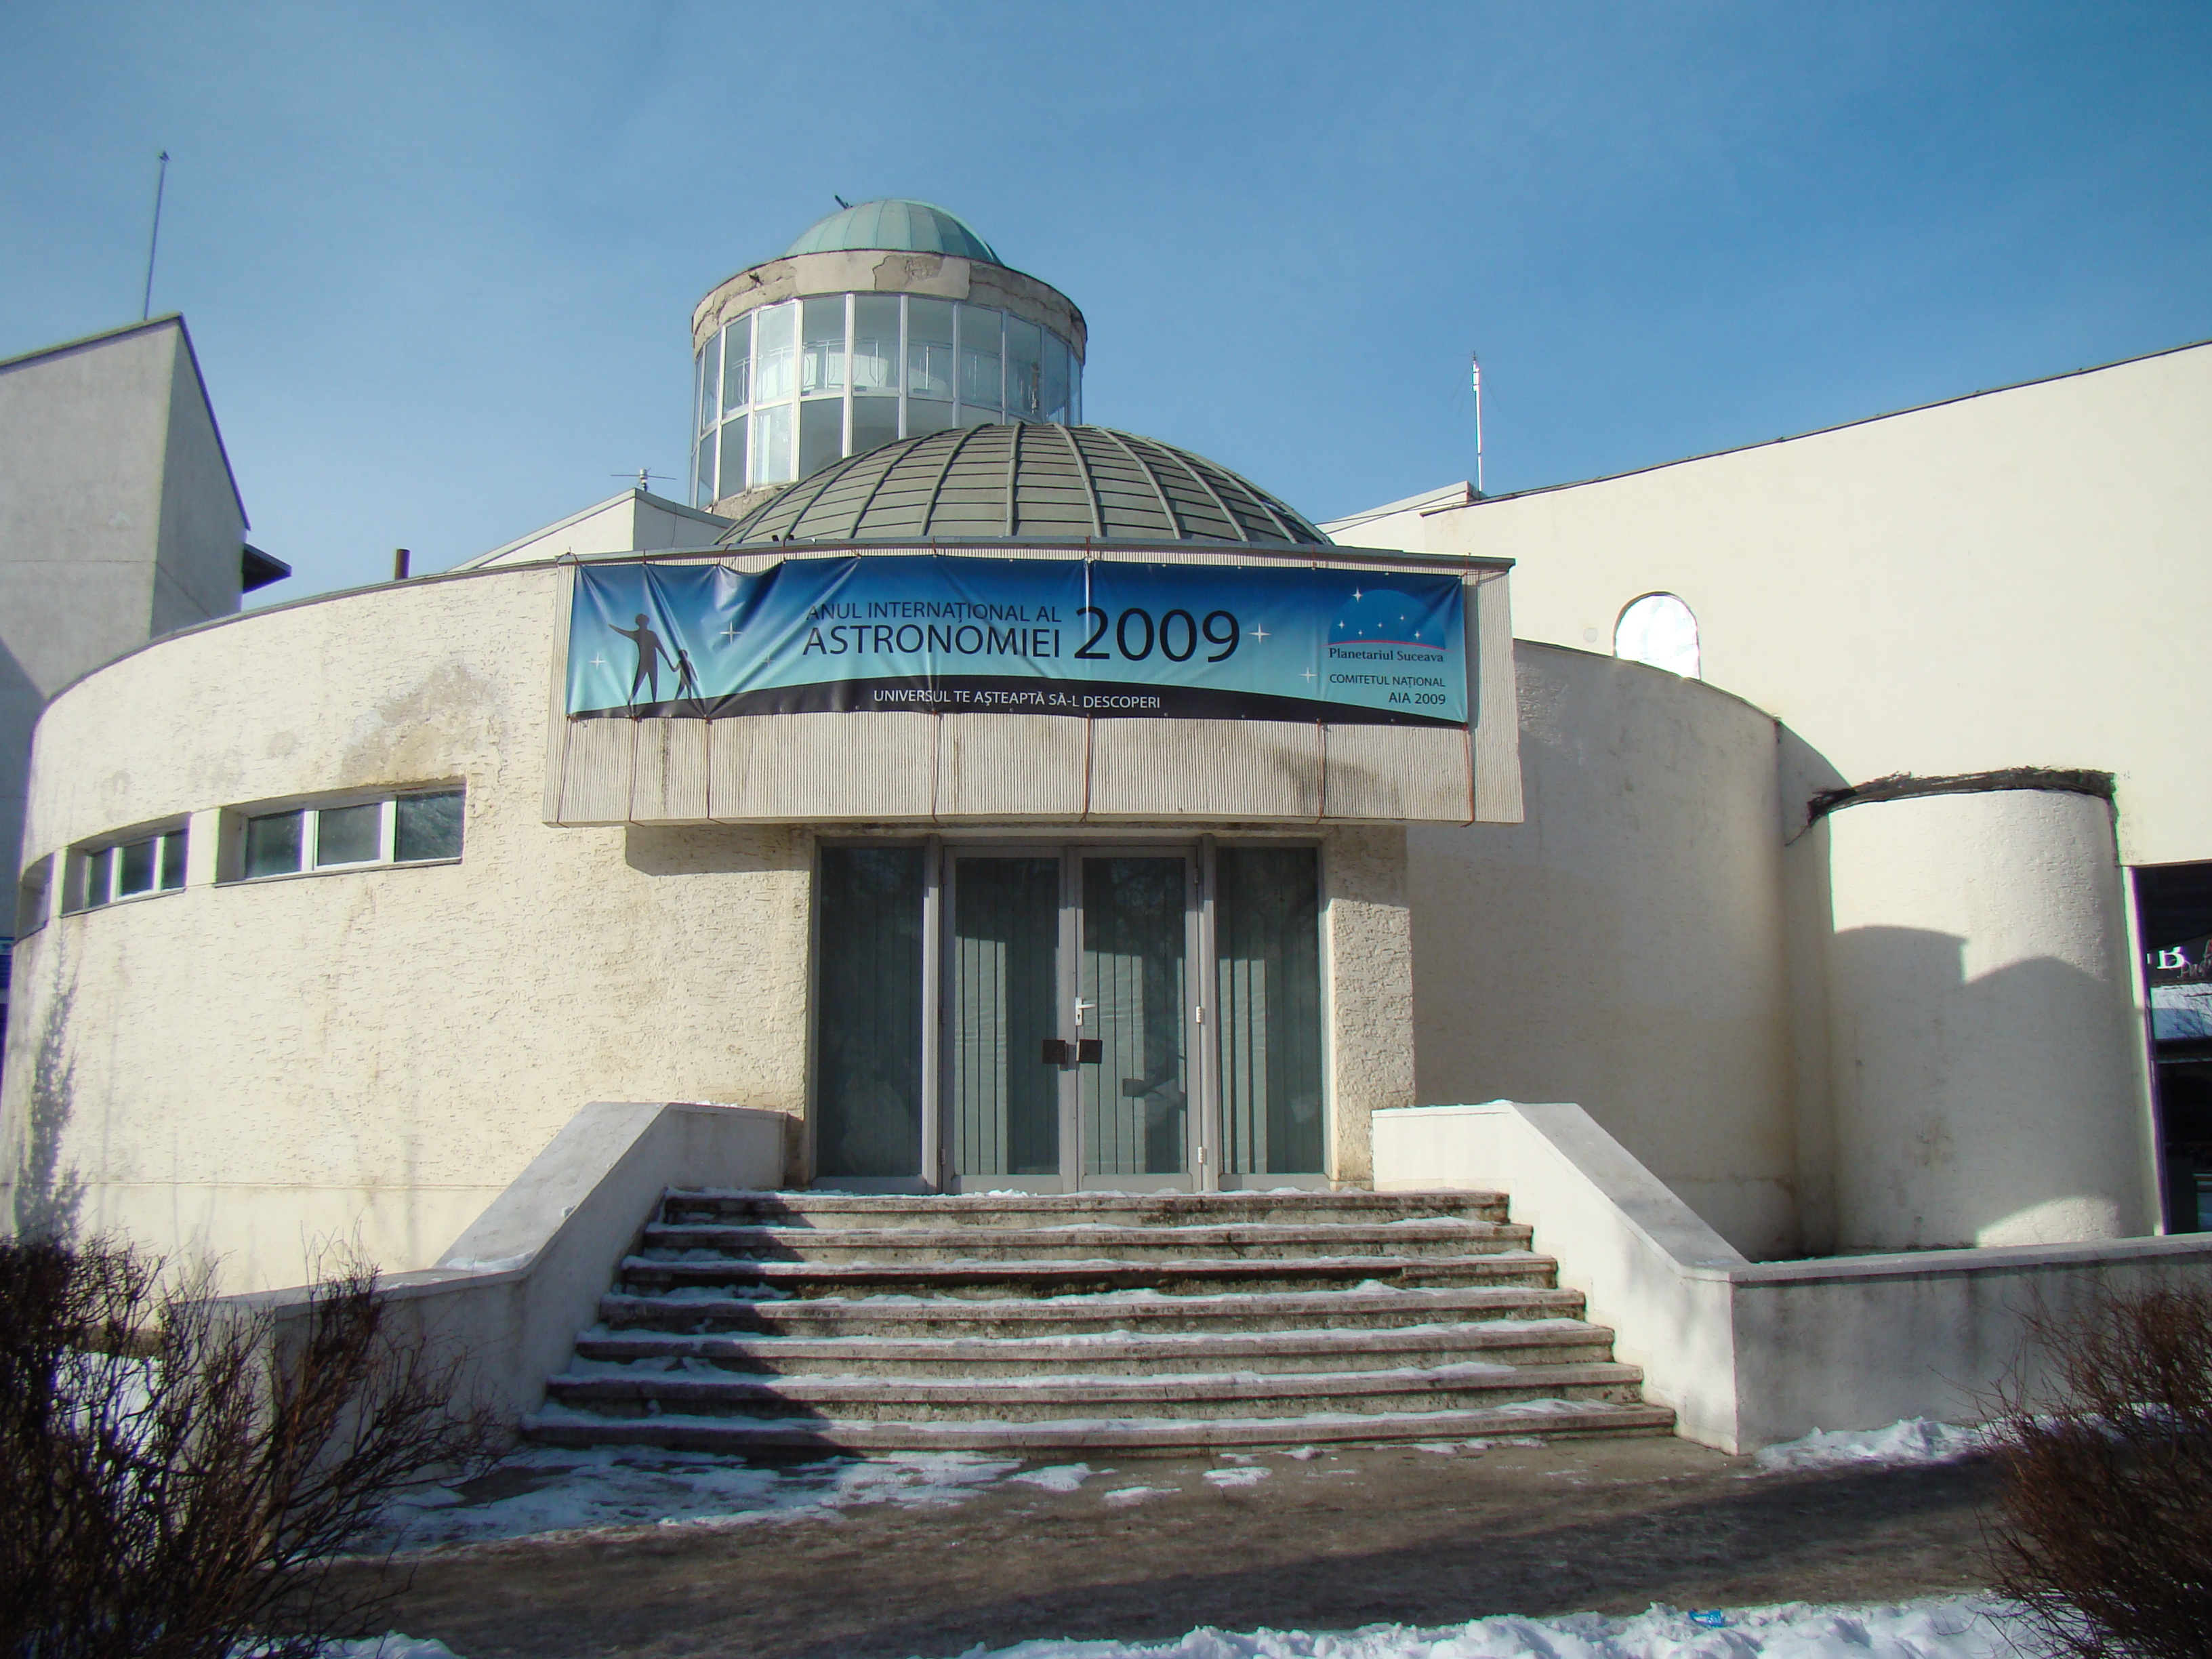 The Astronomical Observatory